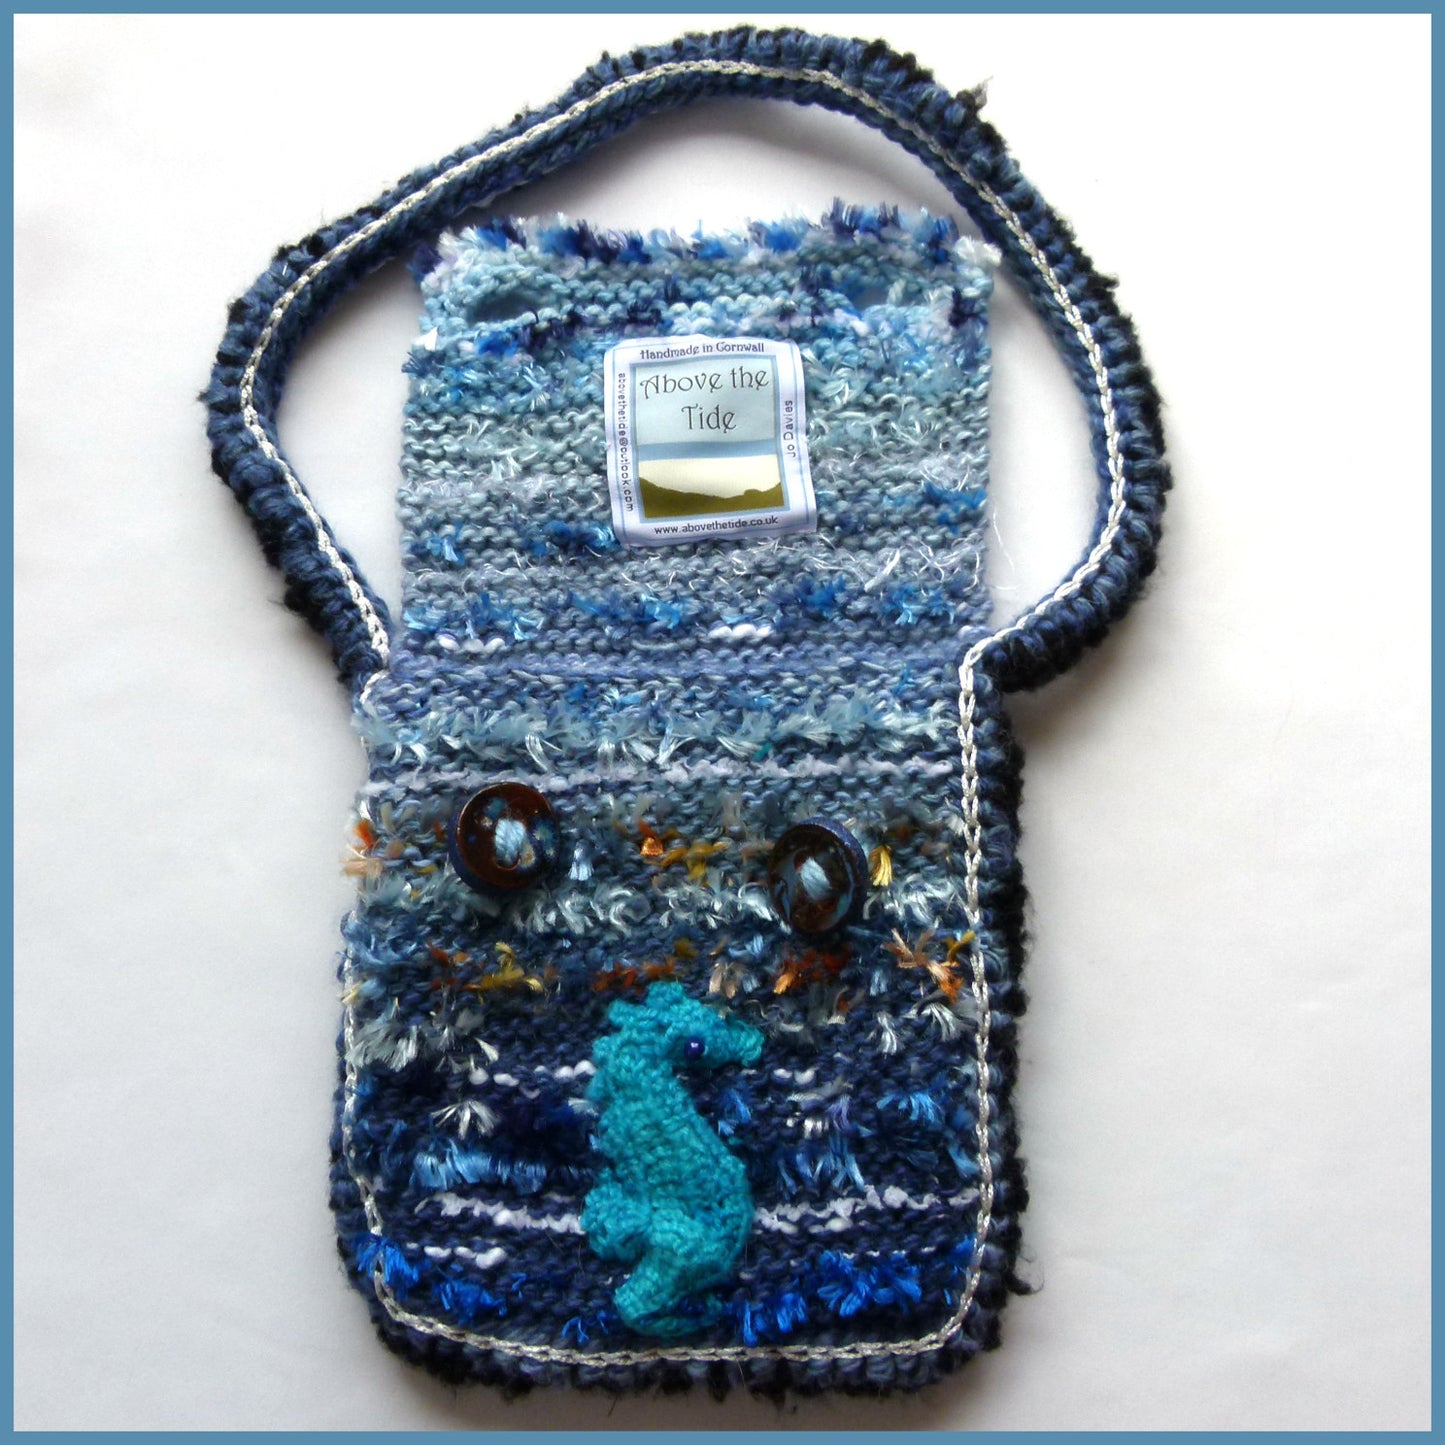 Handmade Sea Theme Textile Shoulder Bag with Turquoise Seahorse